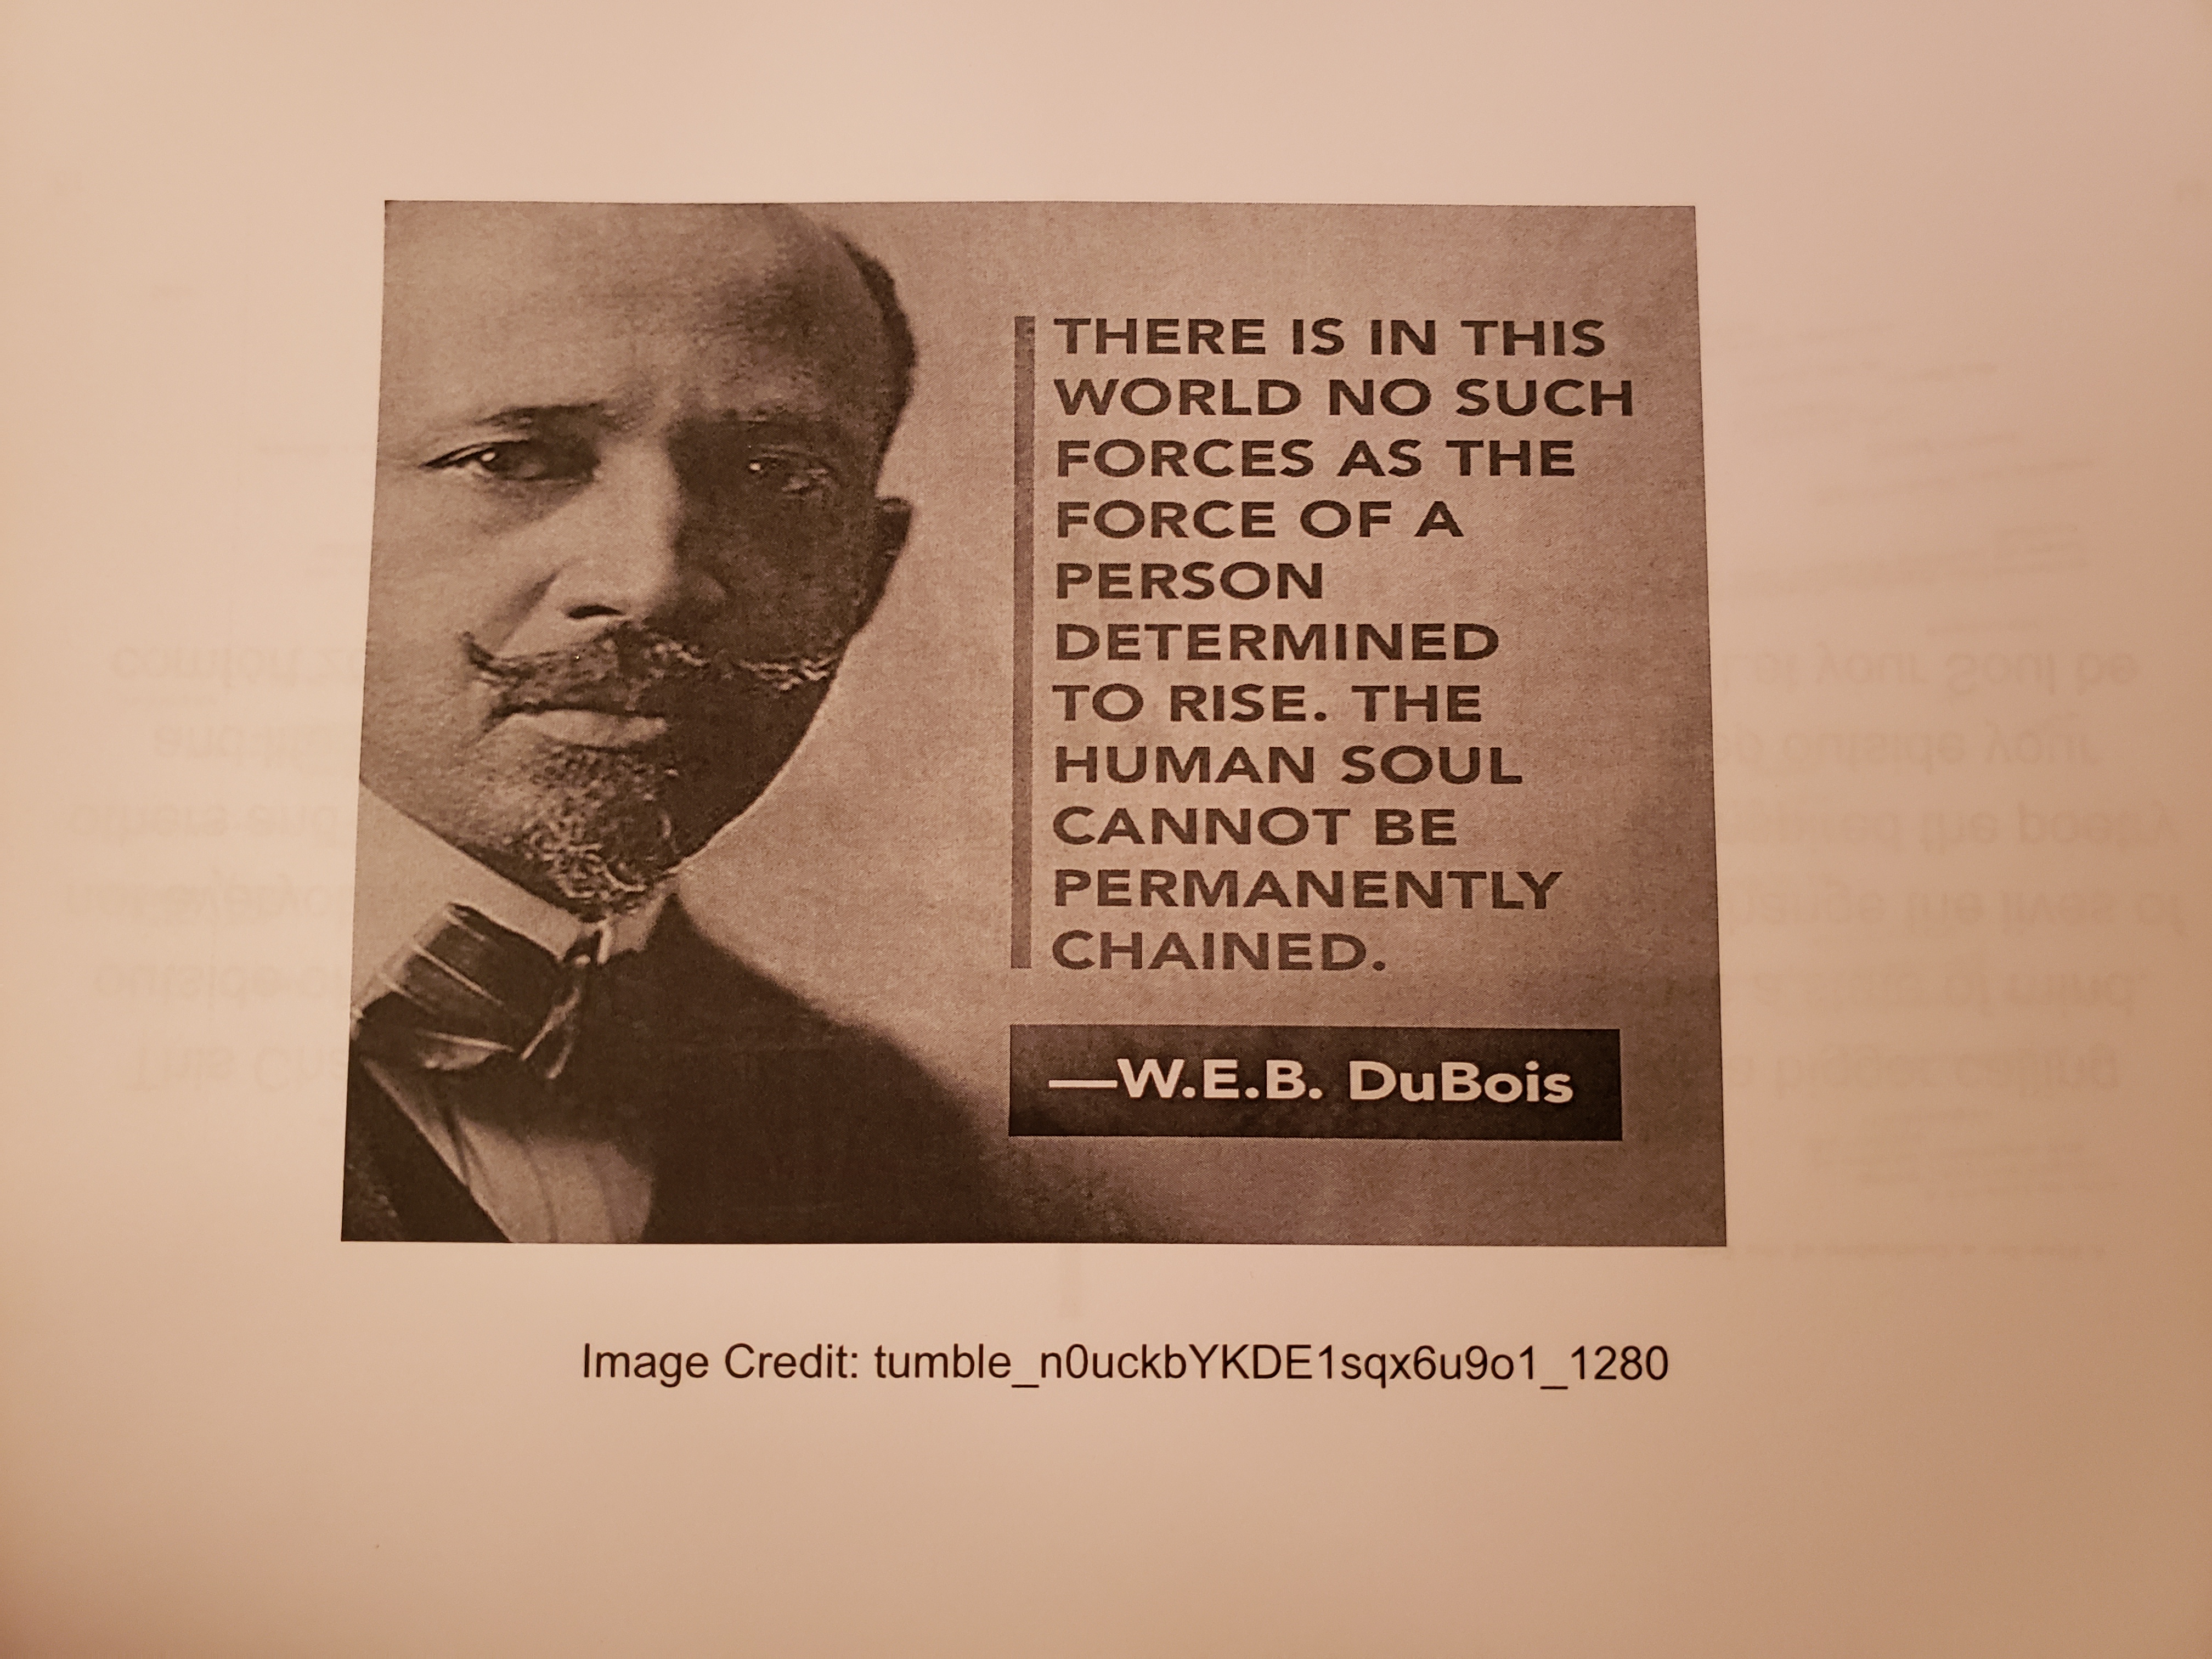 A quote from W.E.B DuBois